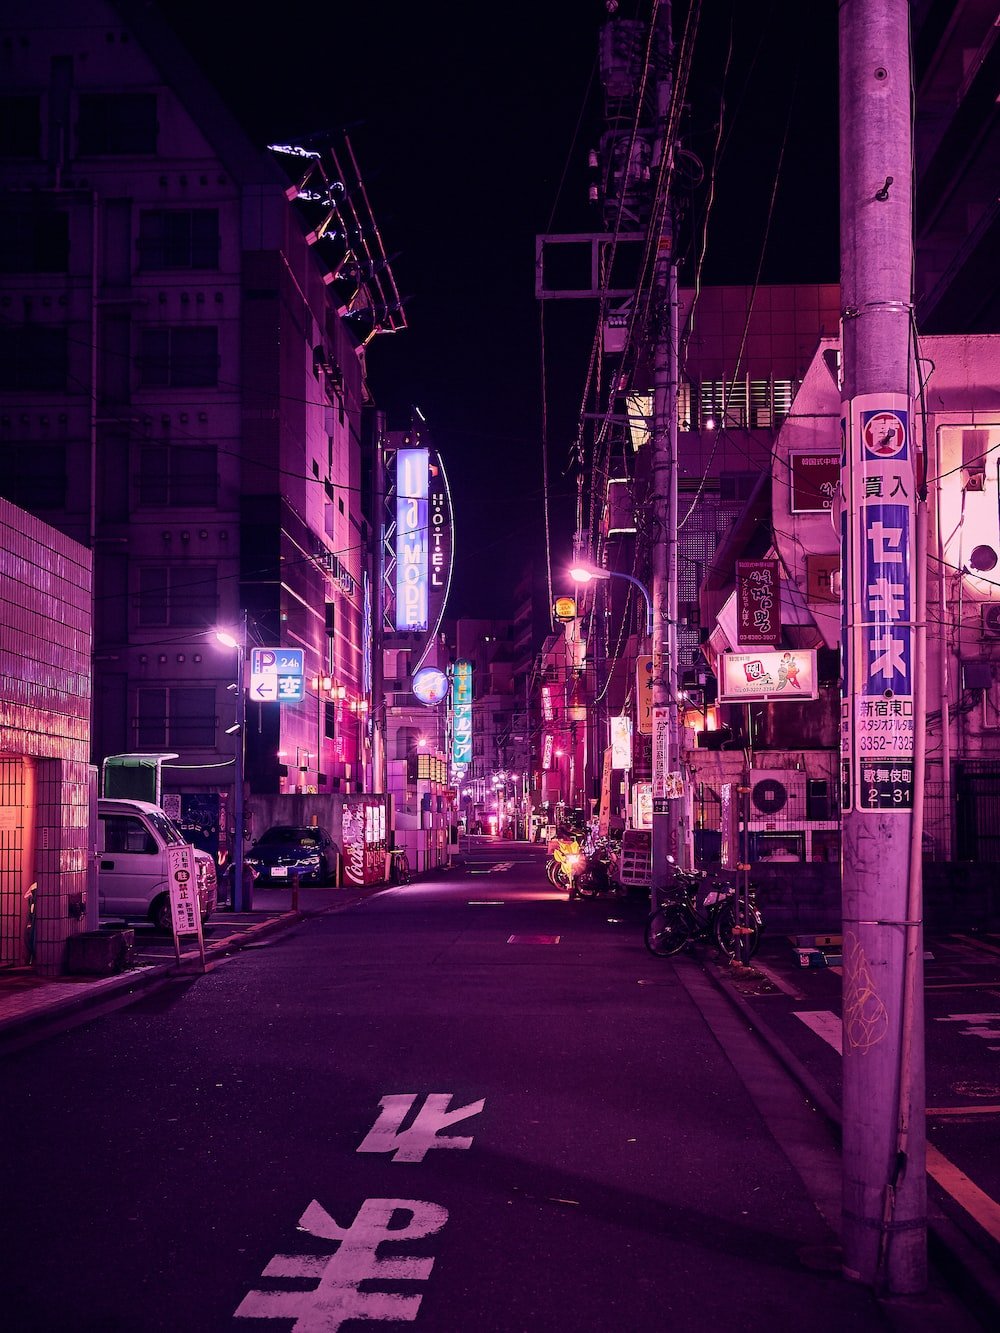 Tokyo Neon Picture. Download Free Image